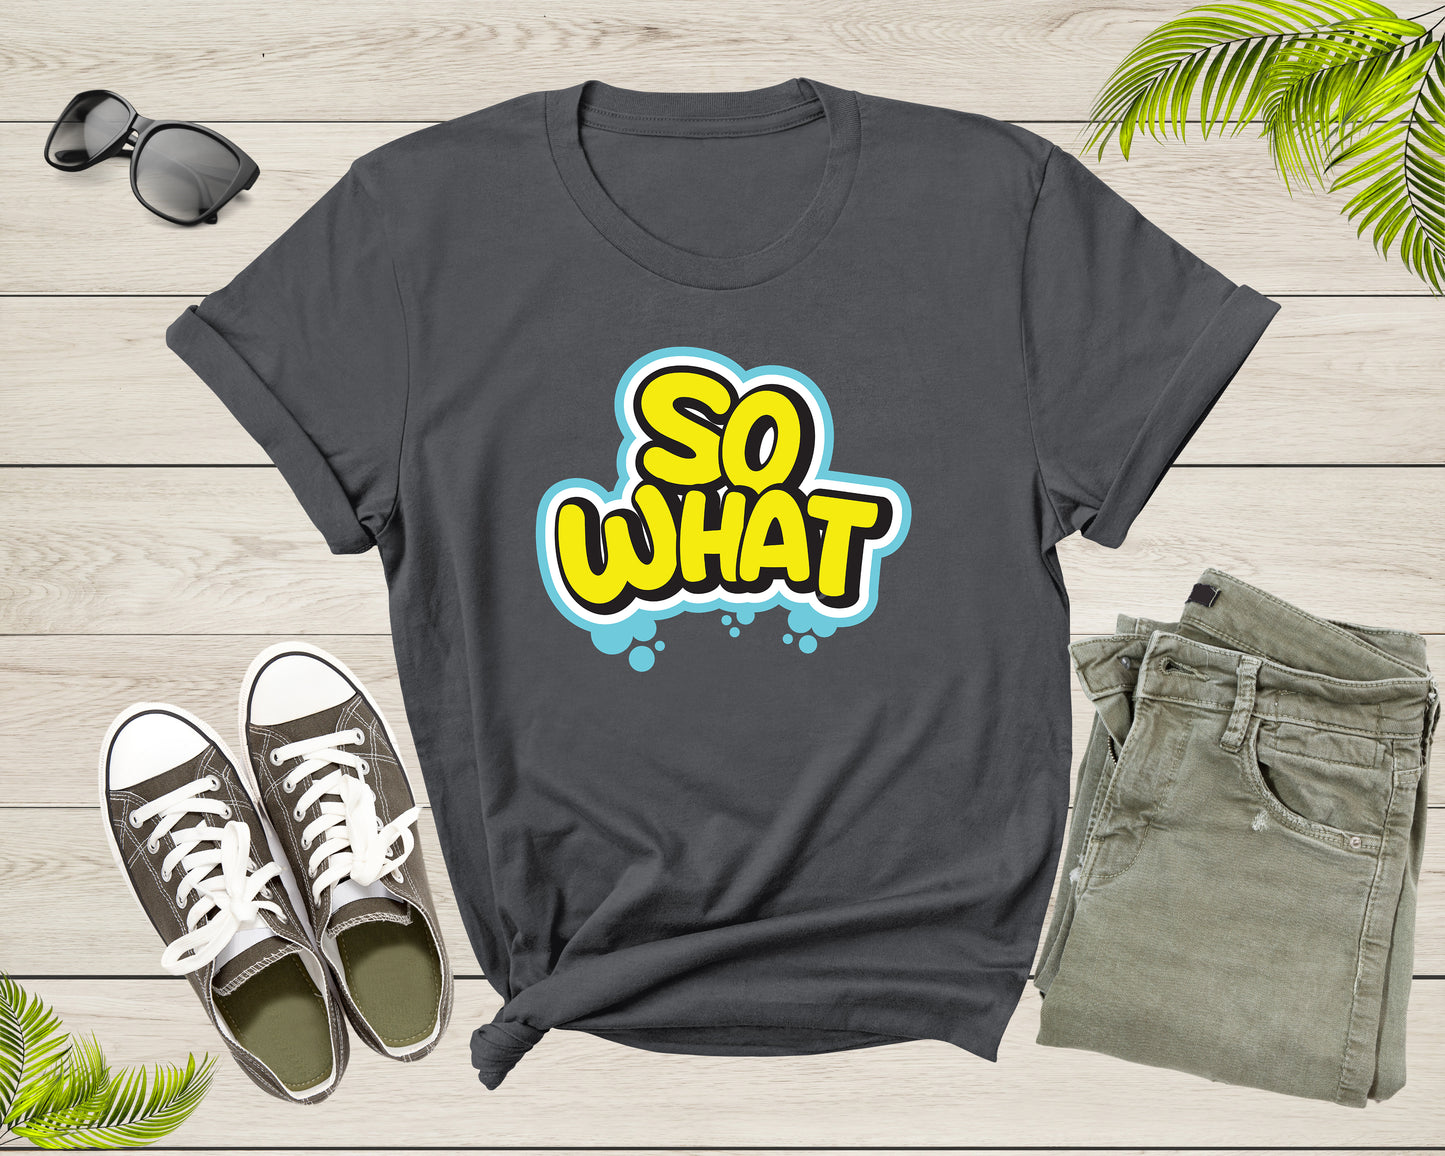 Funny Sarcastic So What Slogan Text Cool for Men Women Kids T-Shirt Cool Fun Quote Text Lover Gift T Shirt for Boys Girls Graphic Tshirt